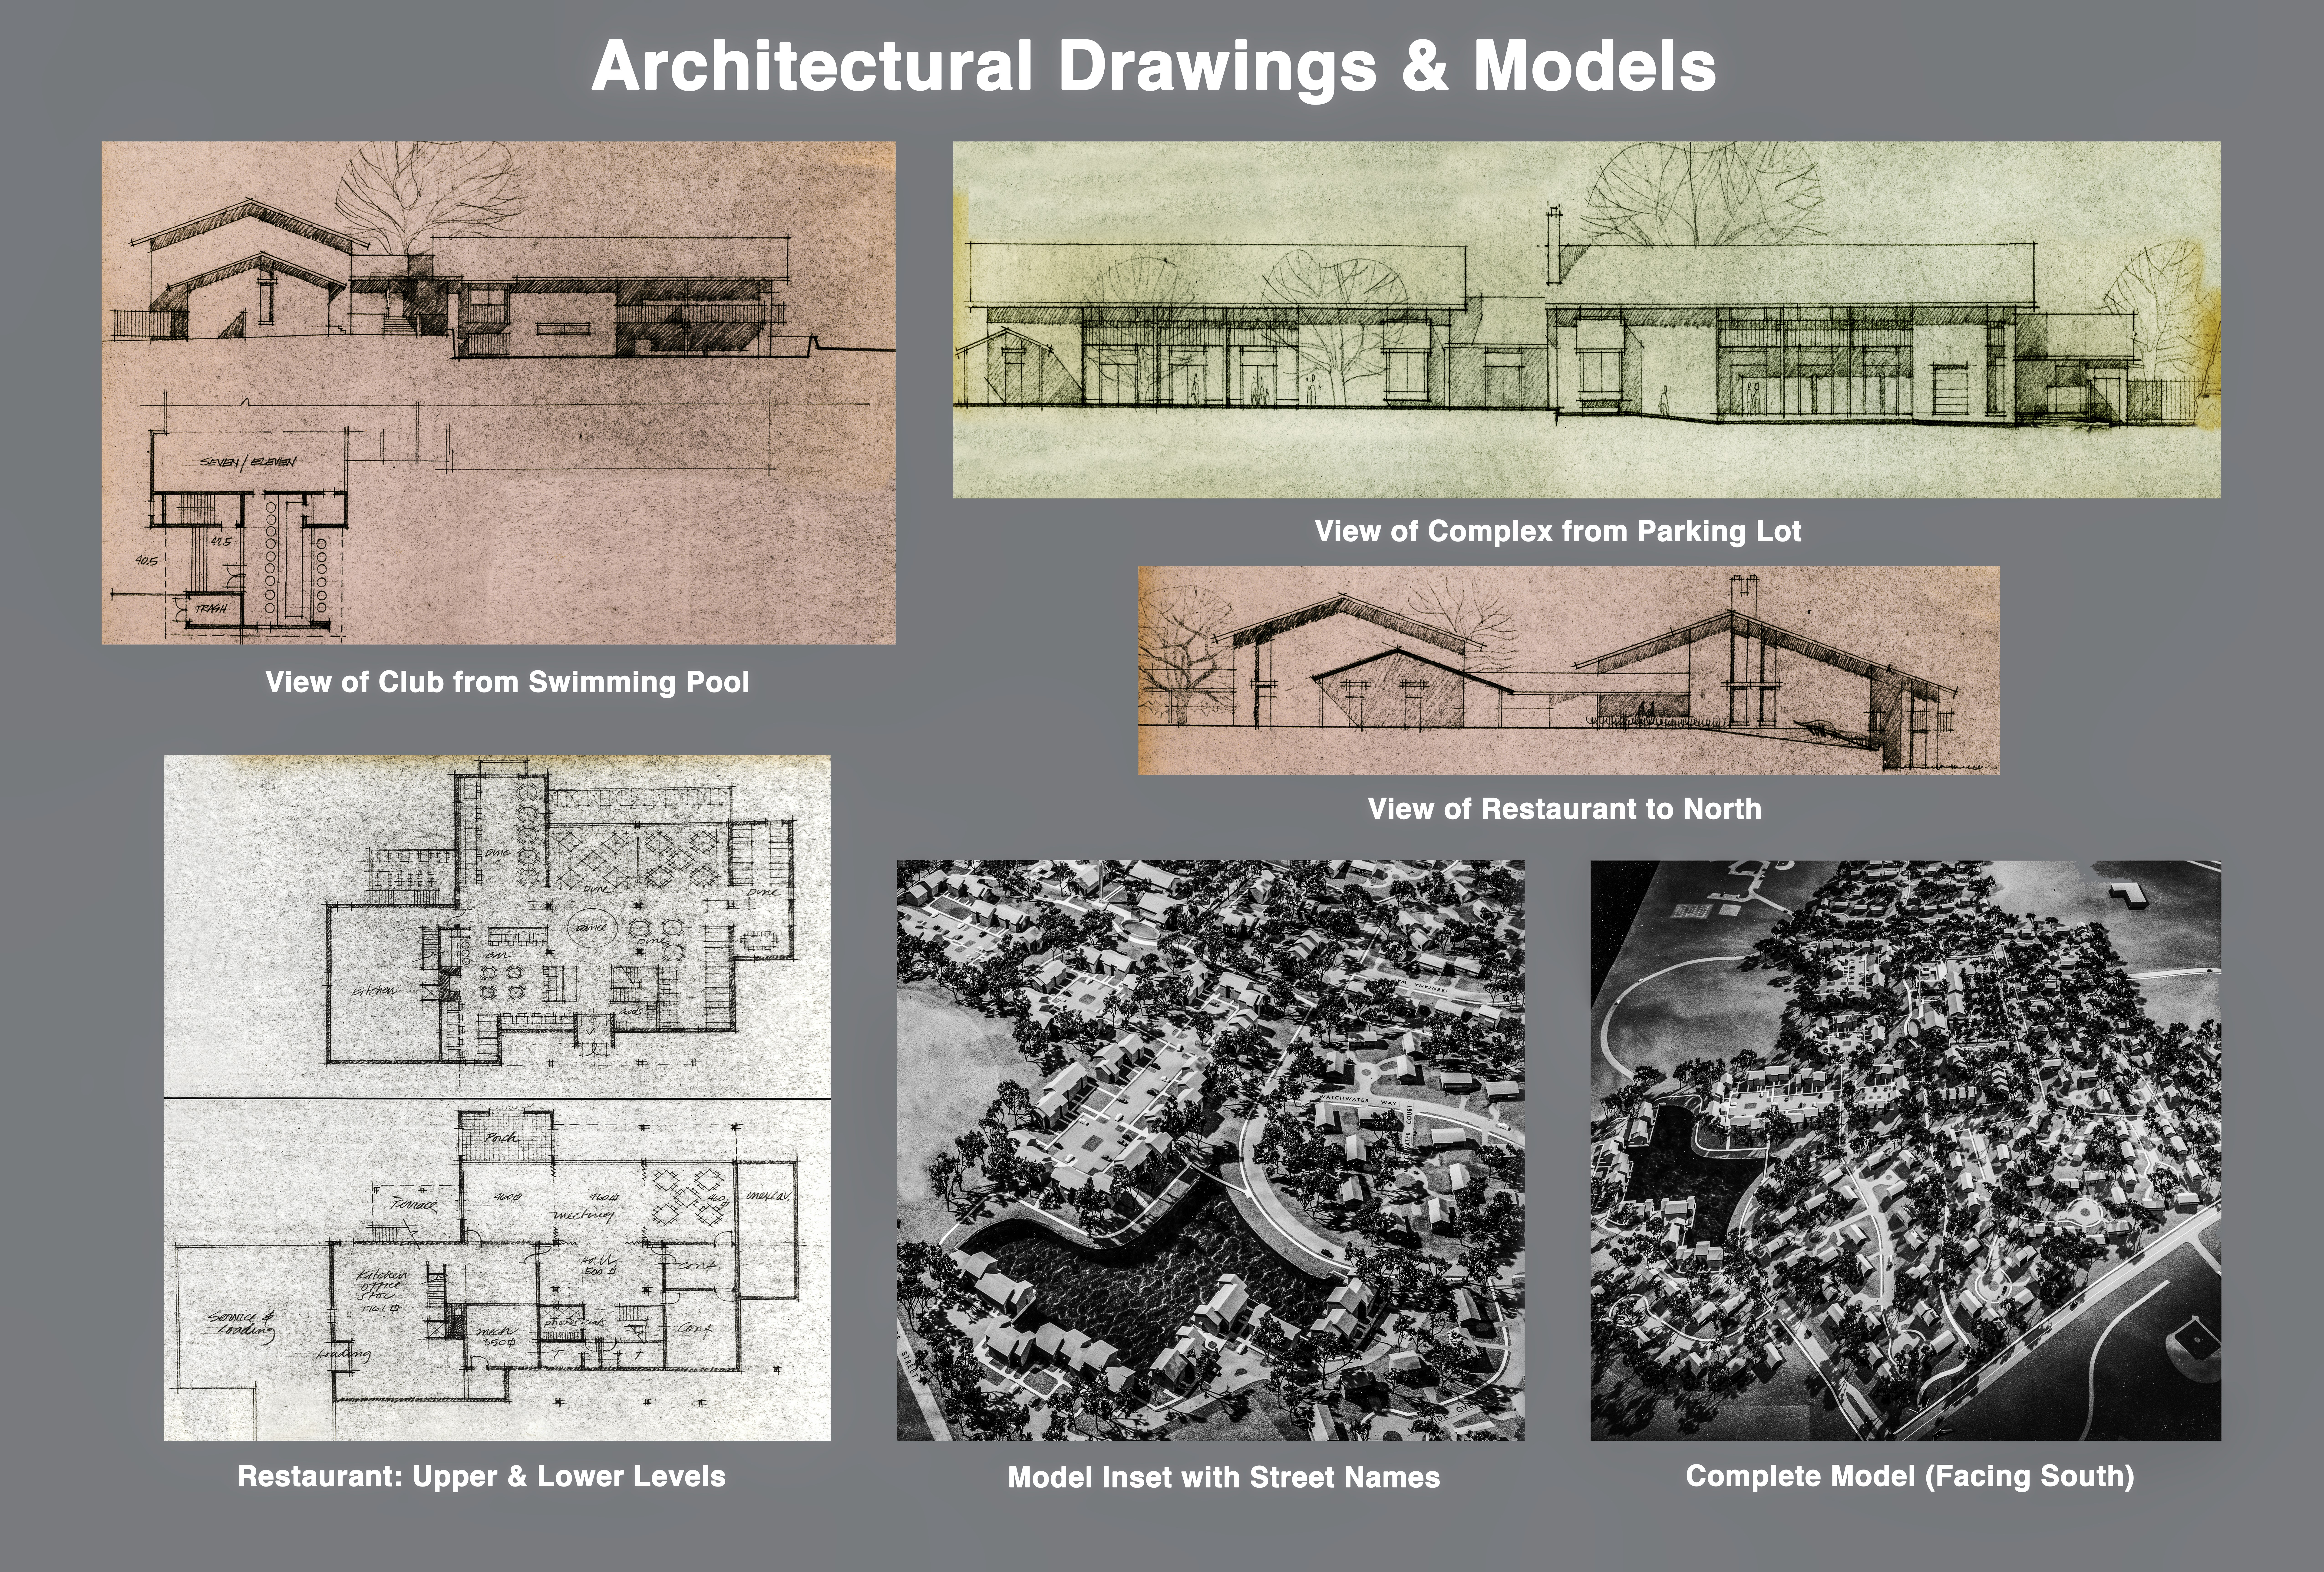 Architectural Drawings & Models